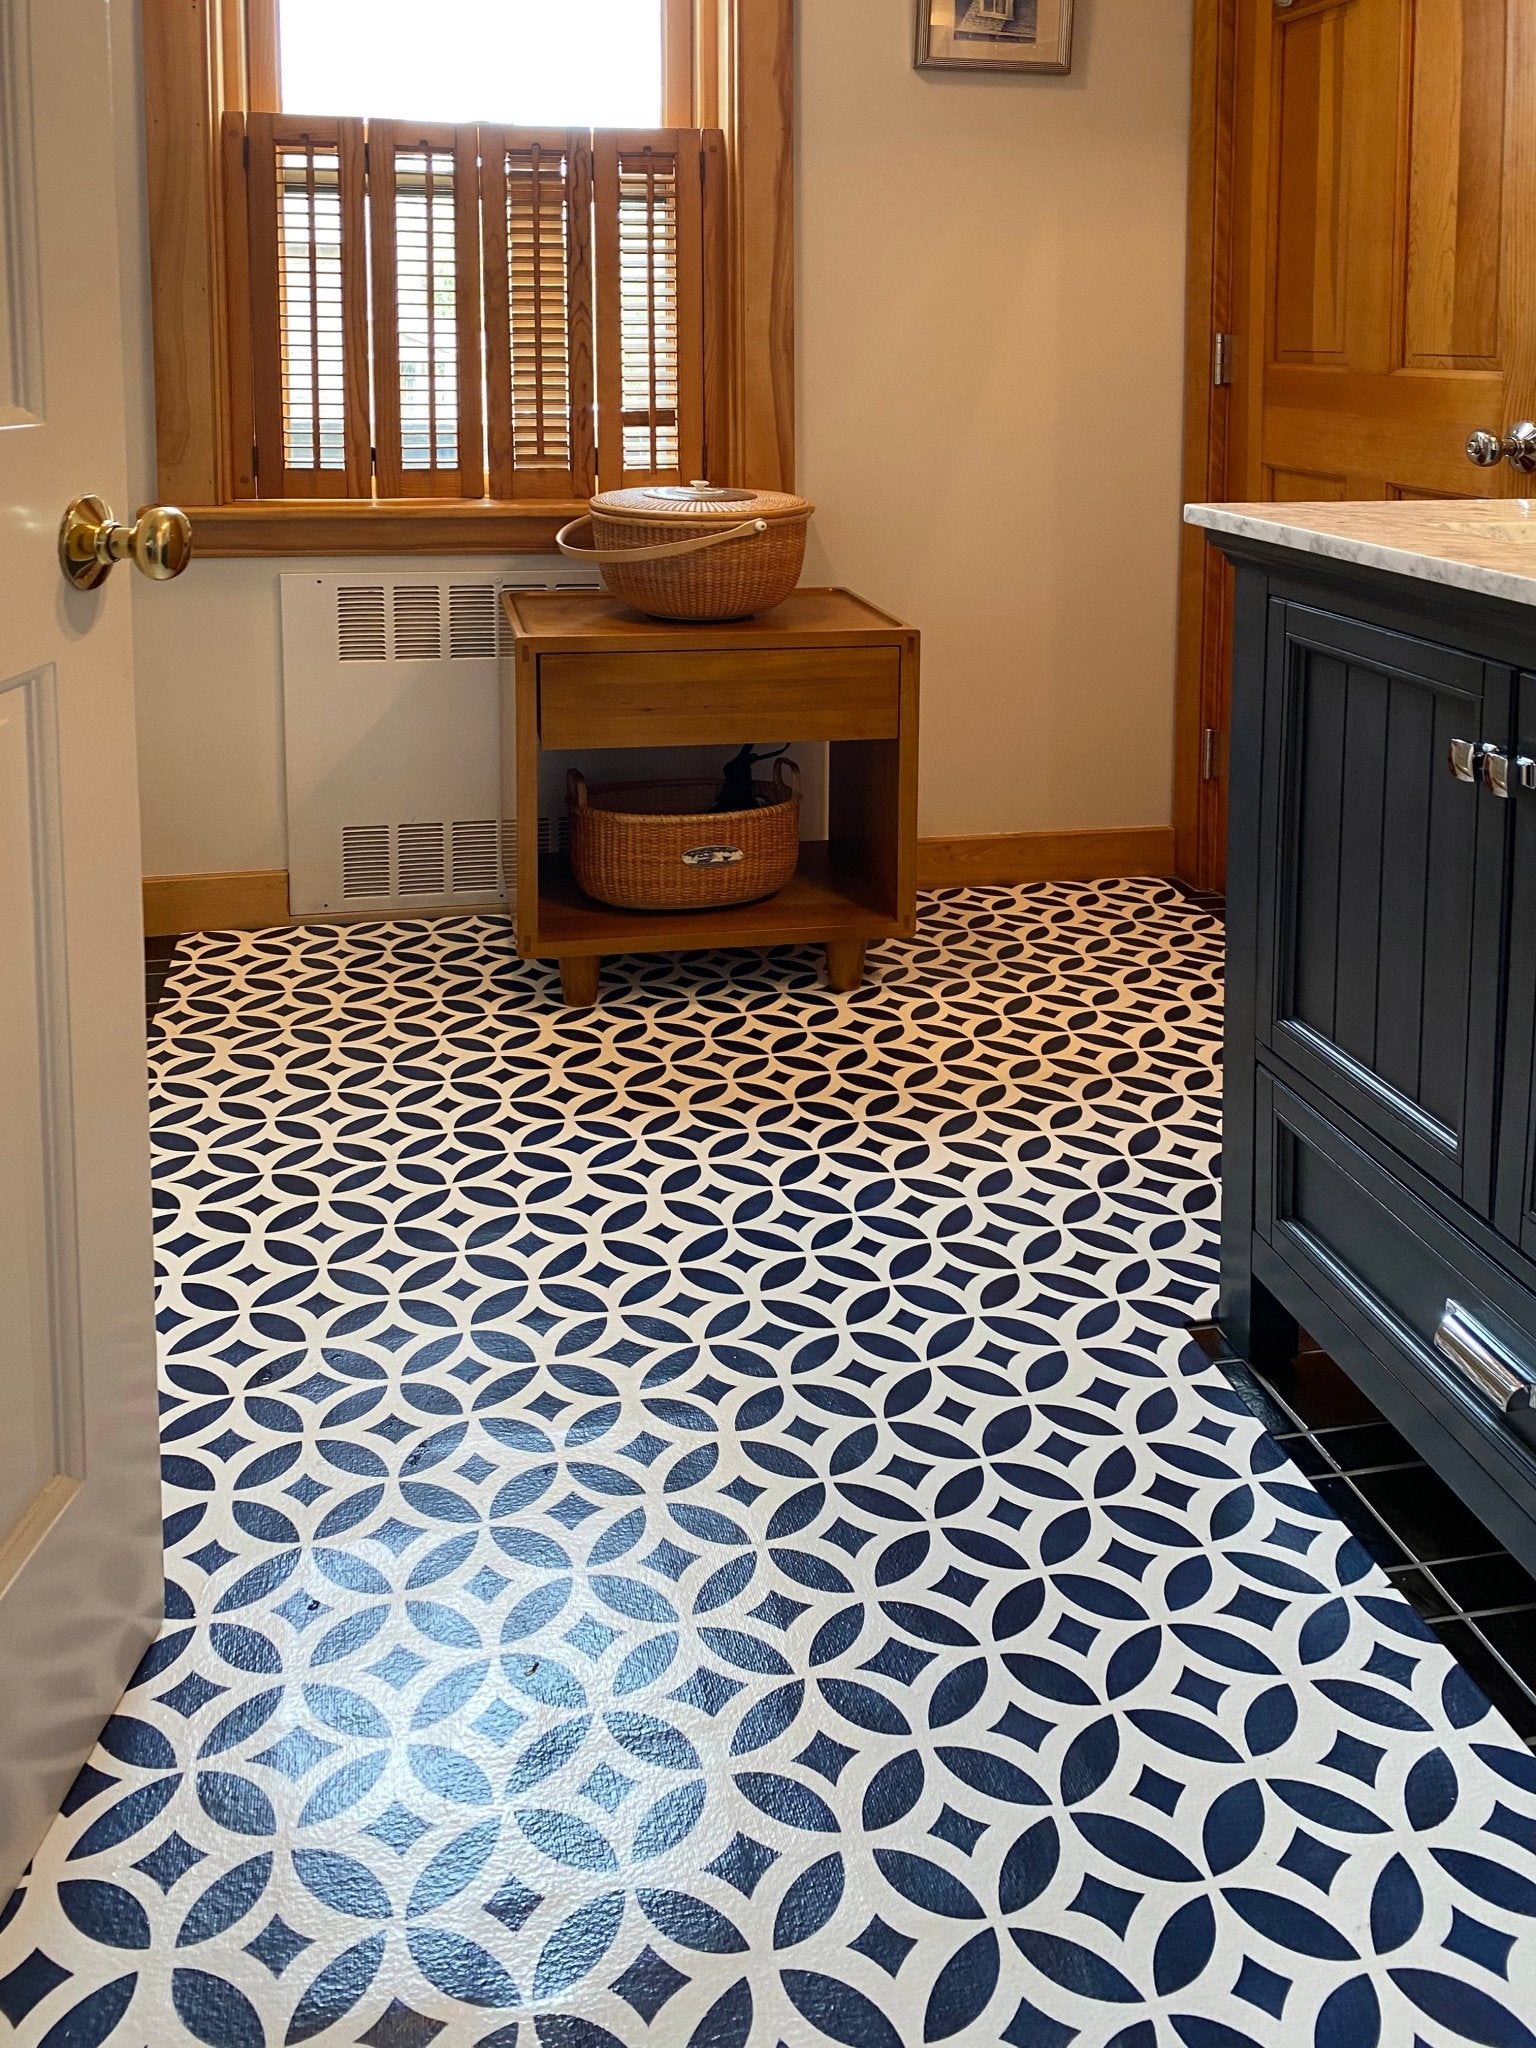 Shaped floorcloth with interlocking circle pattern installed in bathroom.